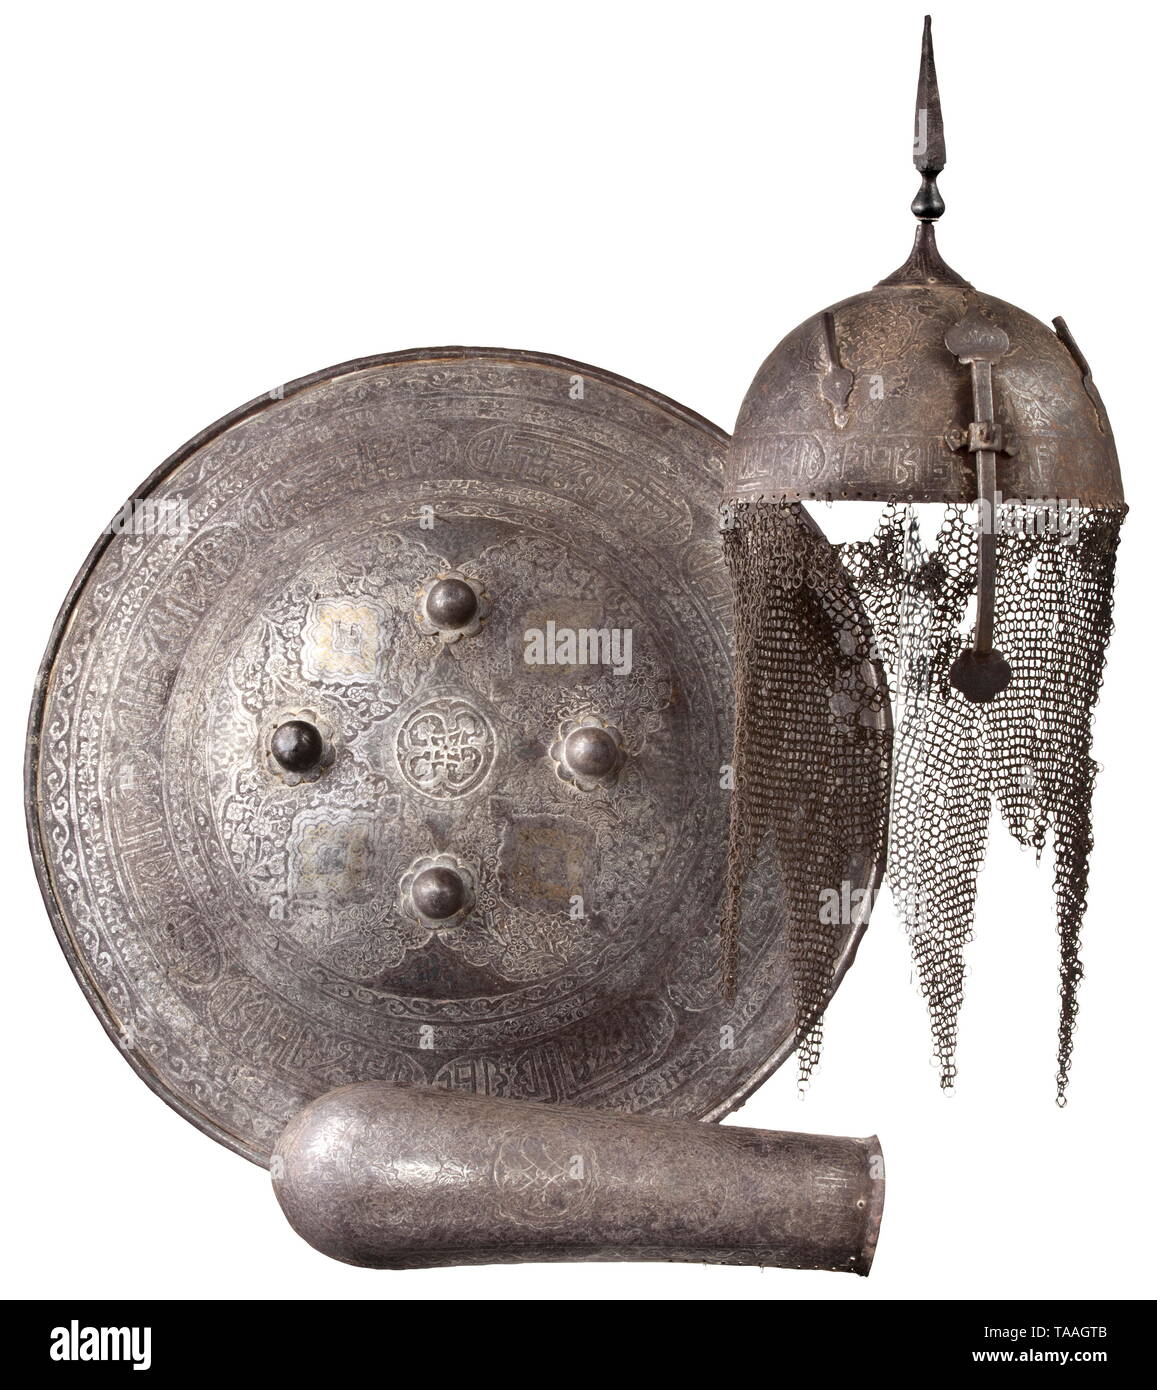 A Persian round shield, helmet and arm guard, 19th century Domed iron shield with riveted reinforcement around the edge. The obverse profusely etched with flowers damascened in brass and silver. Four screw-mounted bosses with fastening rings at loops and original (detached) lining at back. Diameter 46.5 cm. One-piece hammered skull profusely etched with ornaments and figures and damascened in (darkened) silver. Screw-mounted quadrangular spike with adjustable nasal bar, plume holder on both sides. Attached aventail of butted iron rings (larger lo, Additional-Rights-Clearance-Info-Not-Available Stock Photo